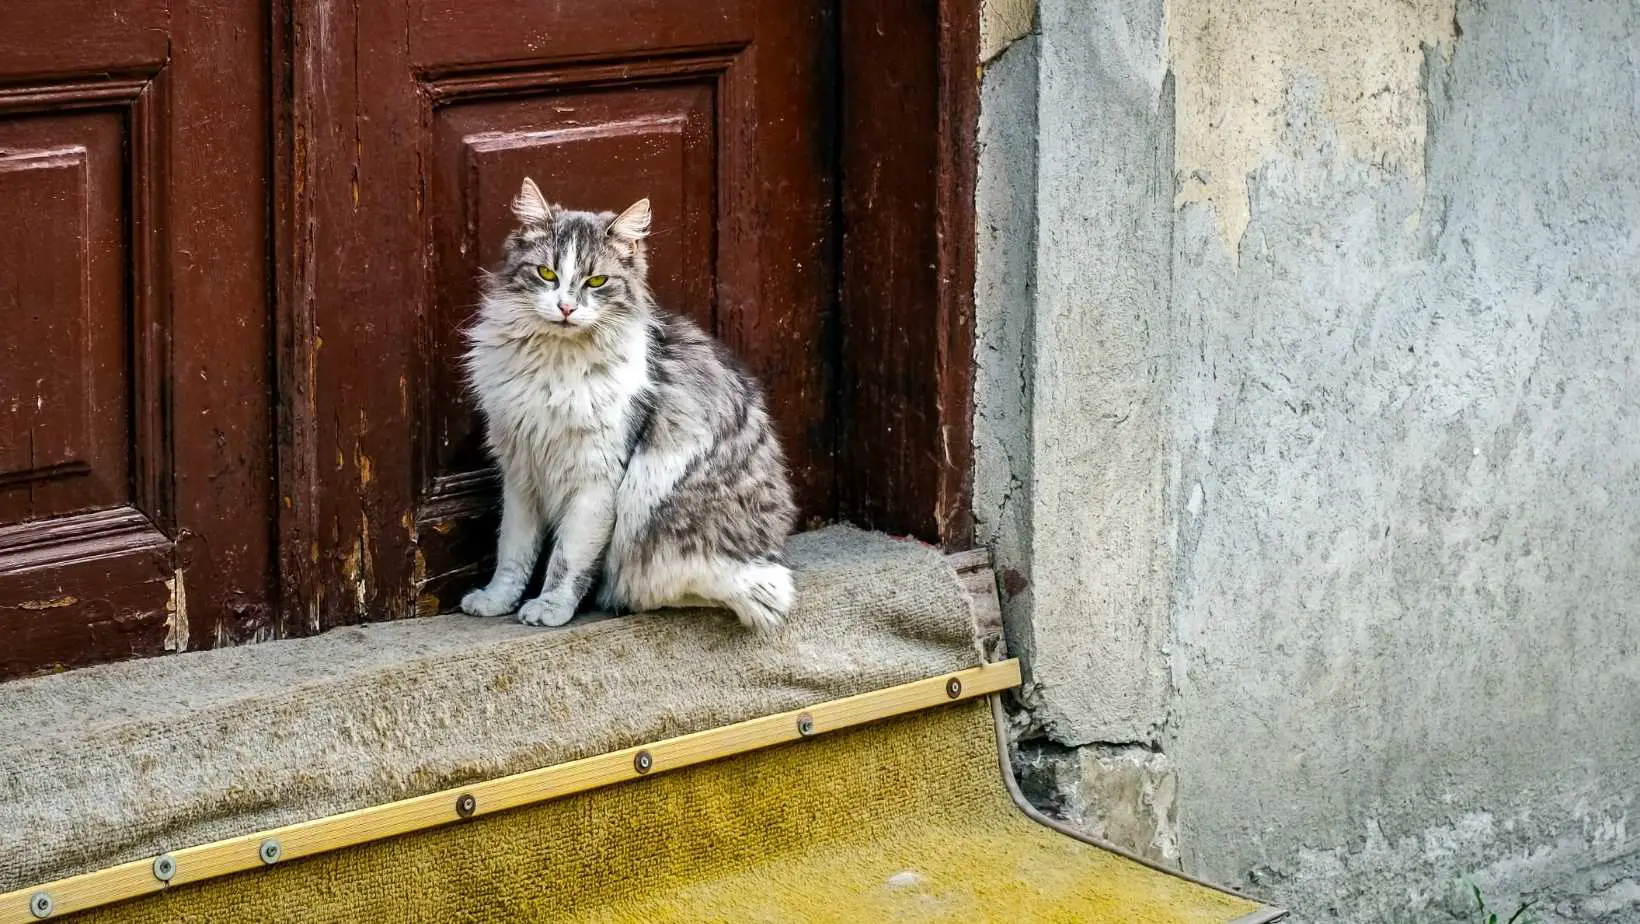 What can I feed a stray cat? When a stray cat appears at your door